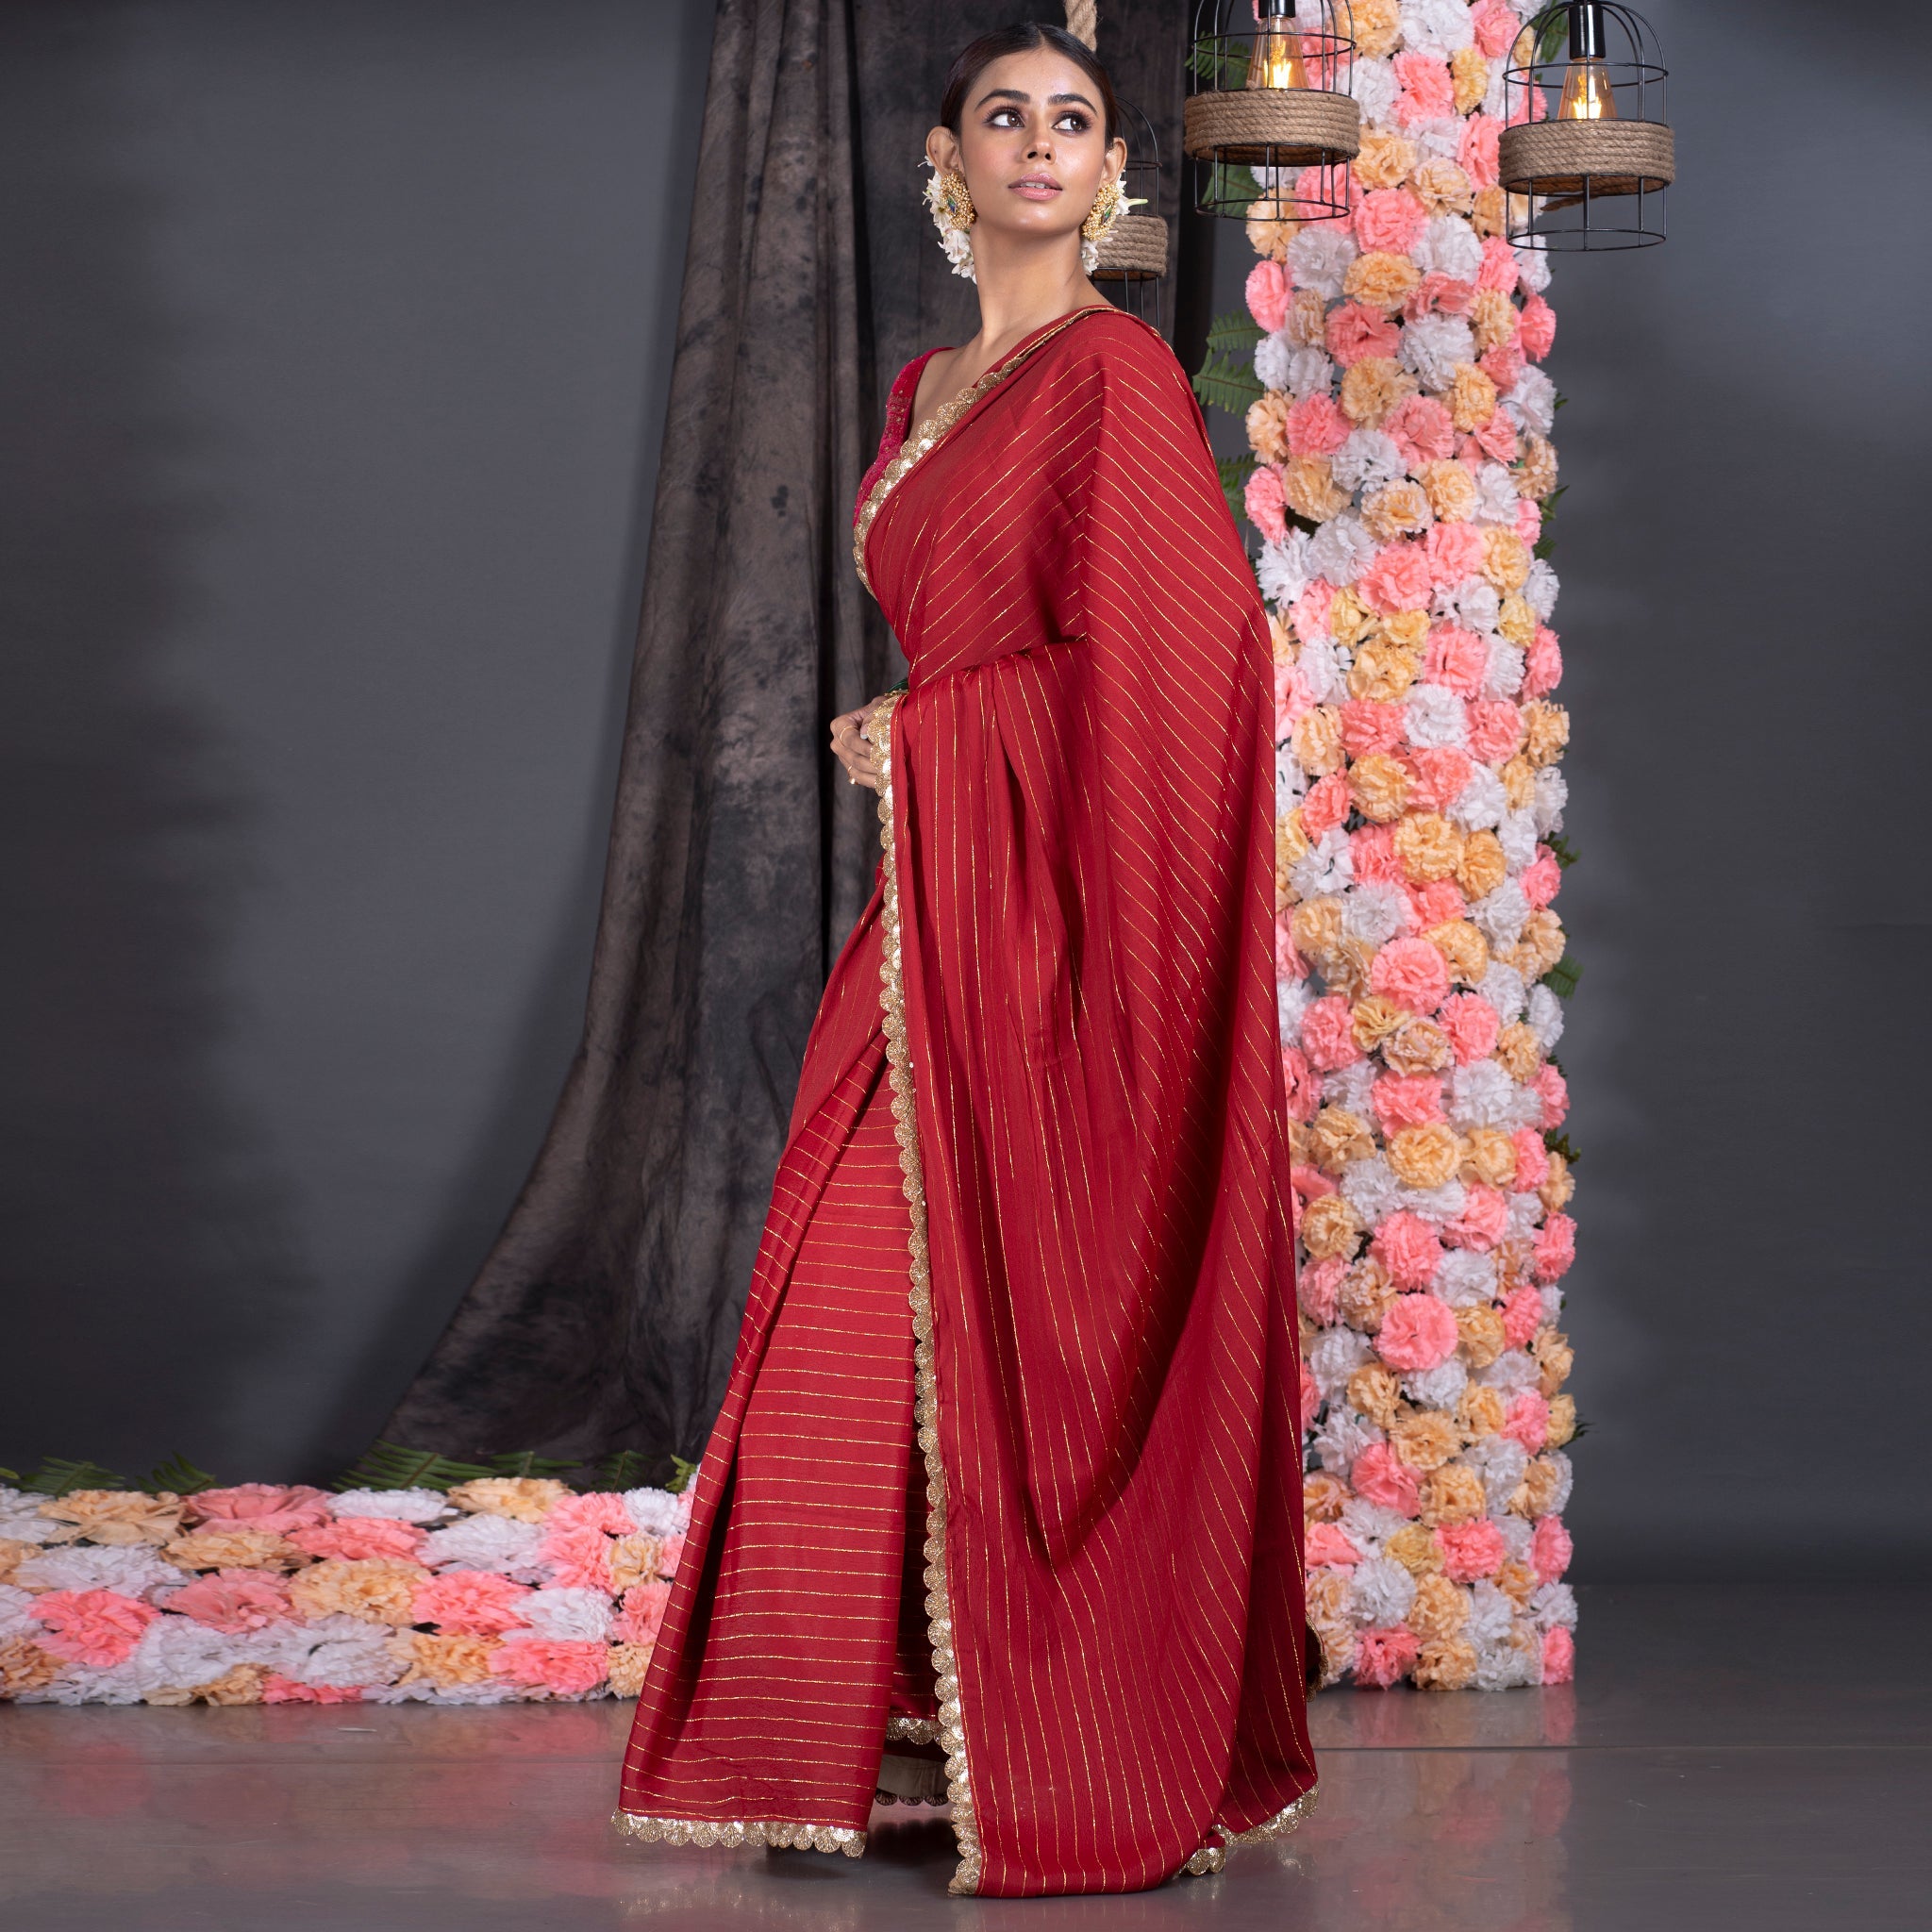 Women's Maroon Georgette Saree With Lurex Gold Stripes And Scallop Embroidered Border - Boveee